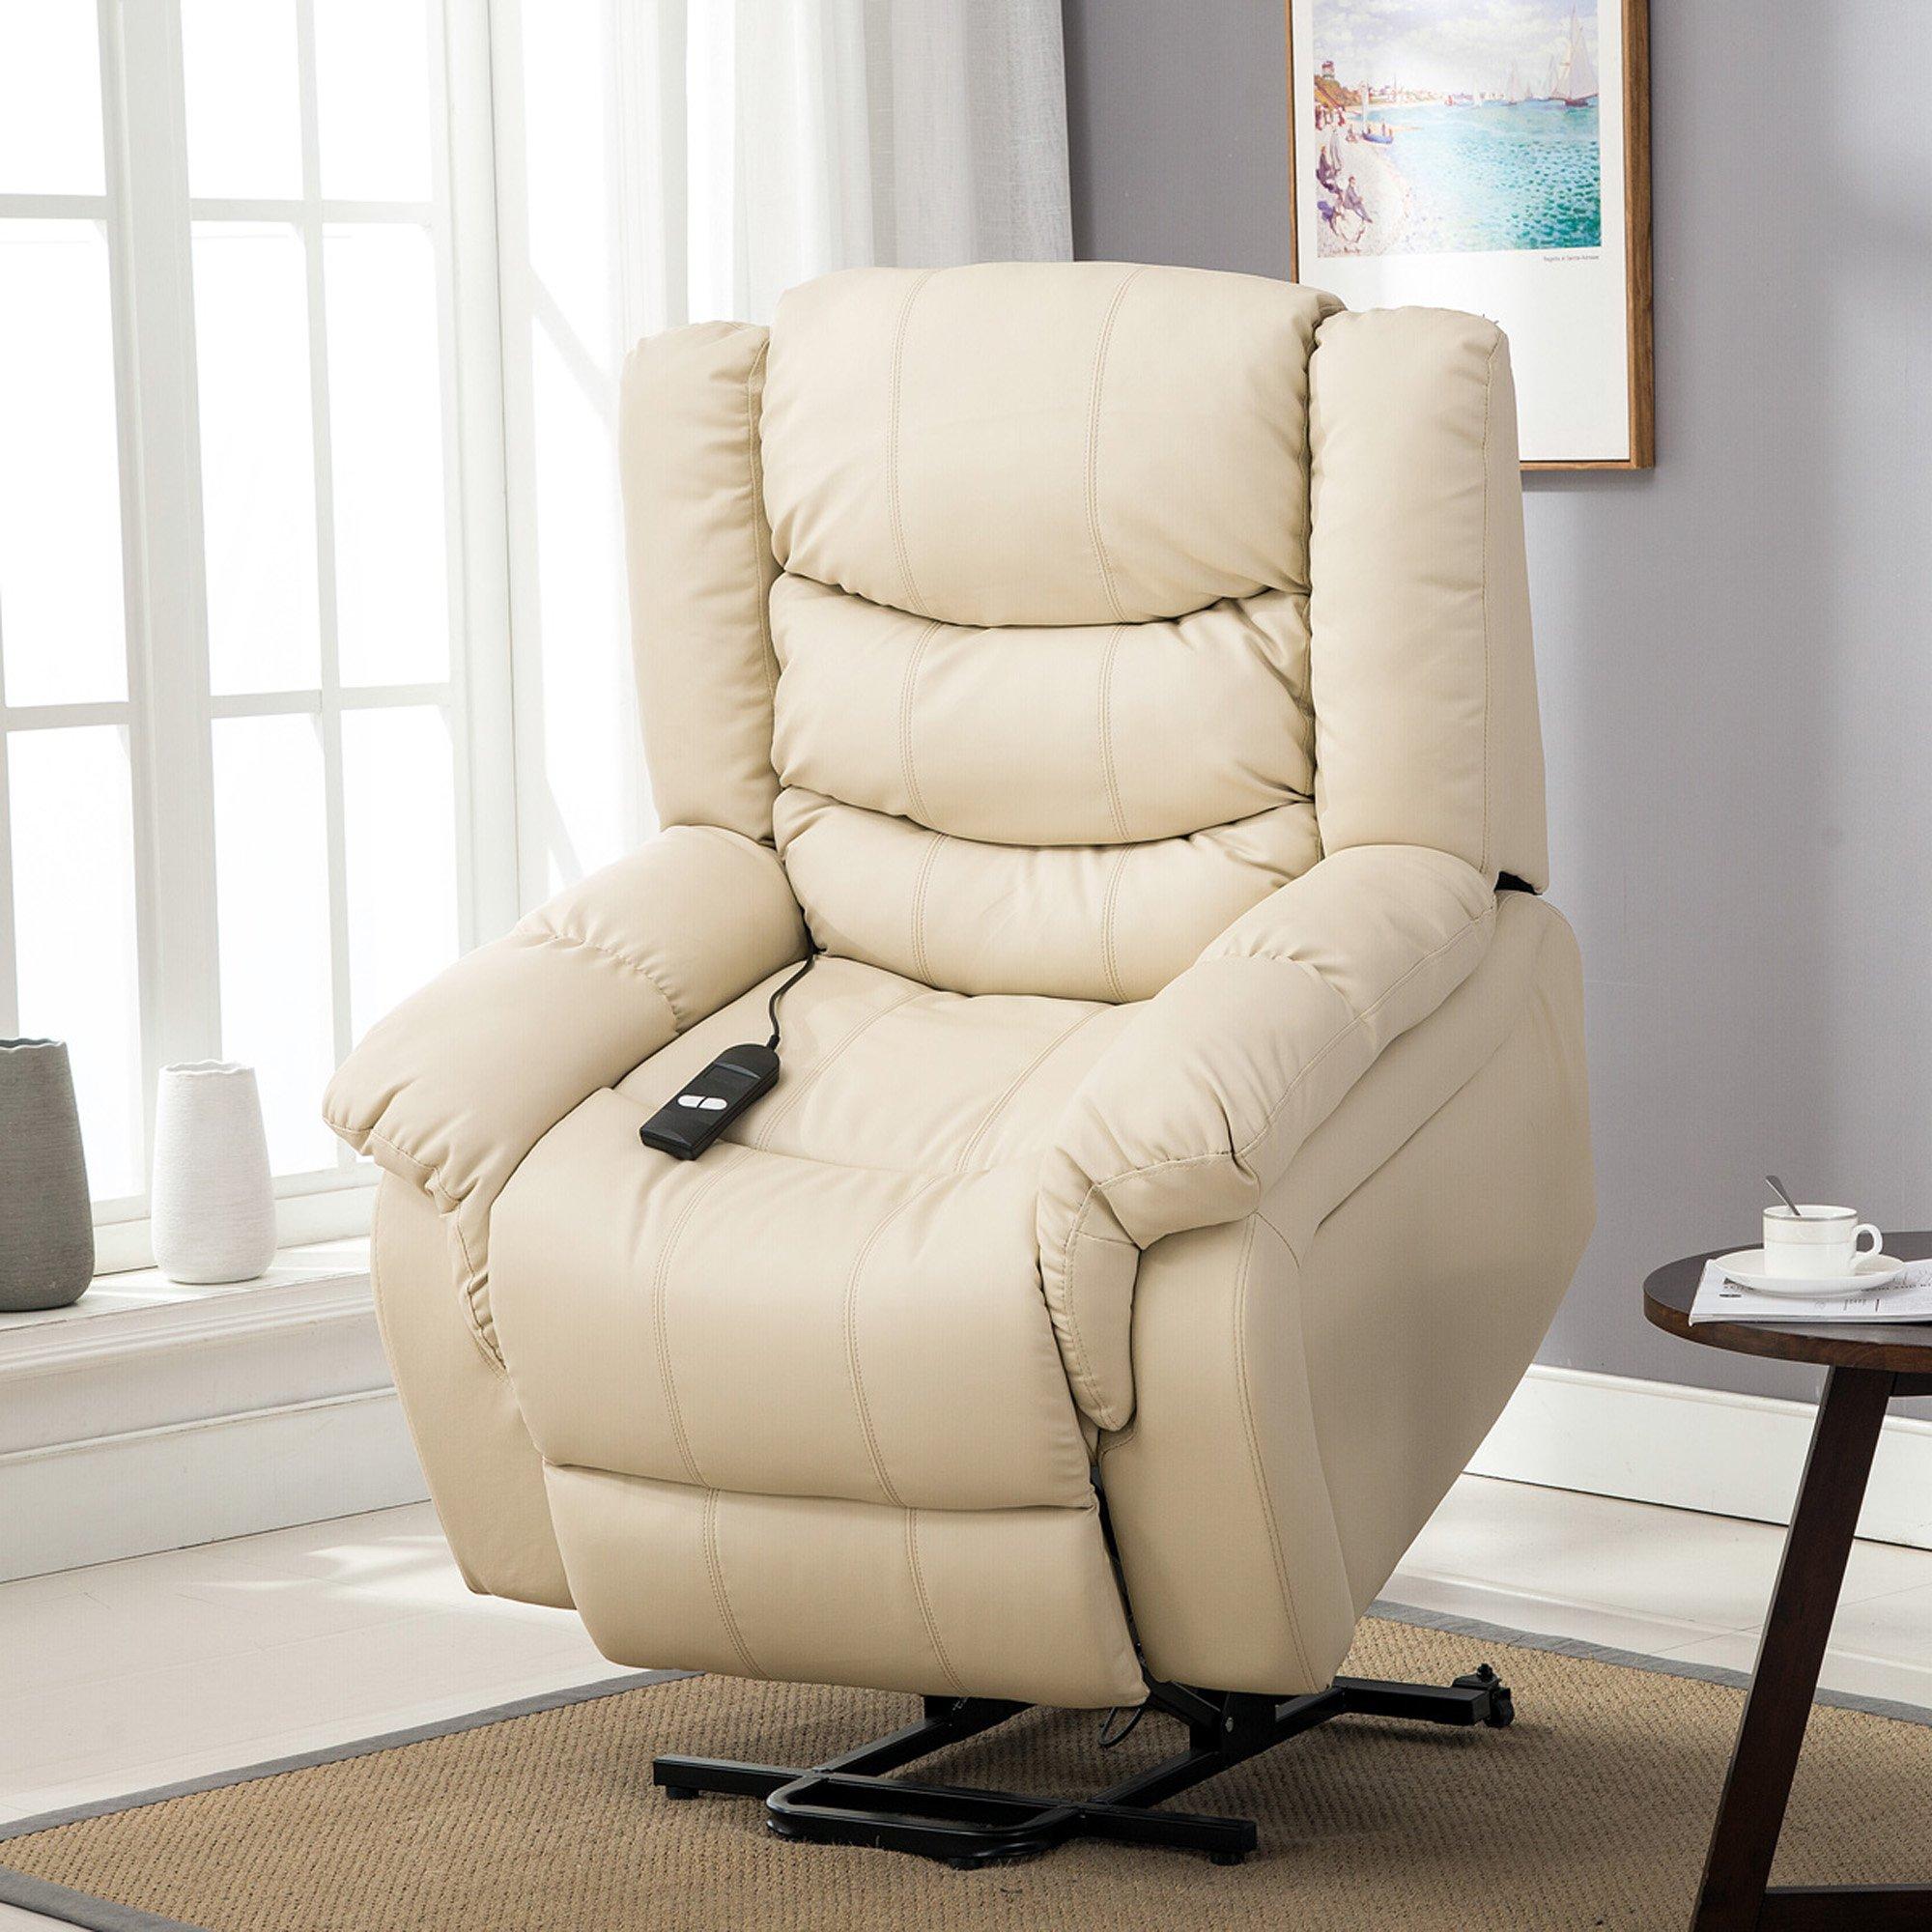 Seattle Electric Single Motor Rise Recliner Bonded Leather Chair